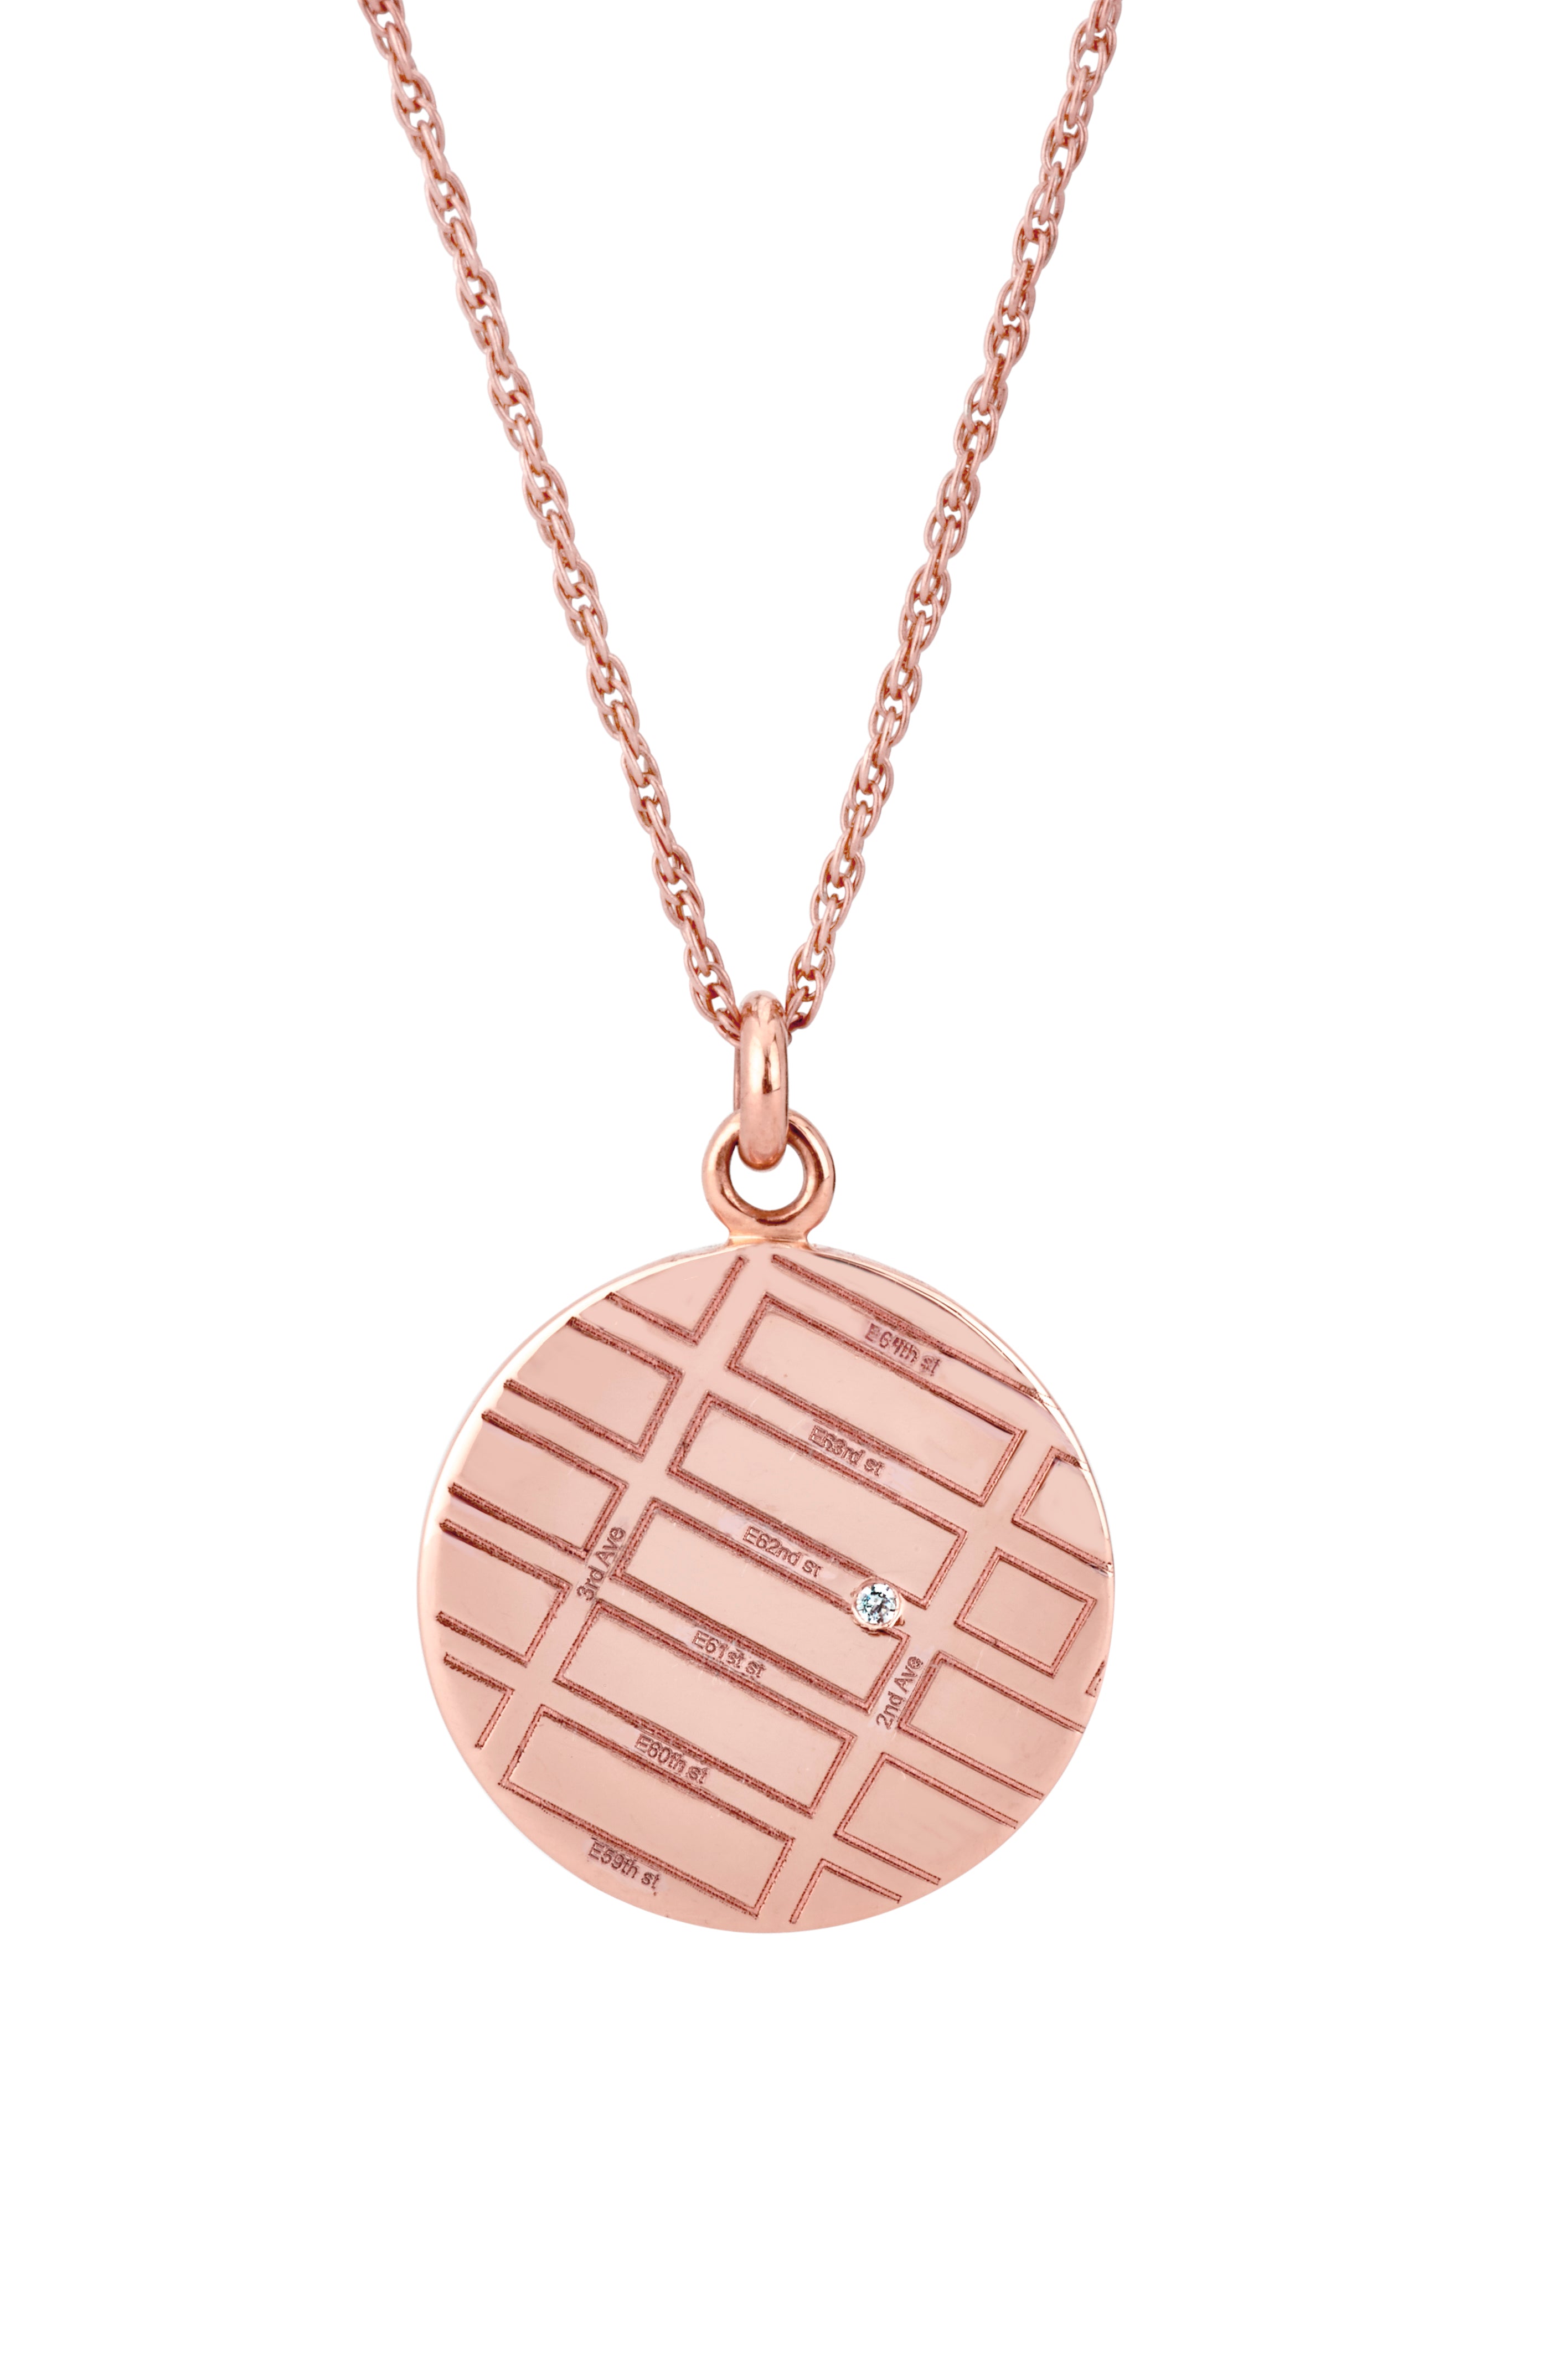 A.JAFFE  ROSE GOLD ROUND MAP PENDANT